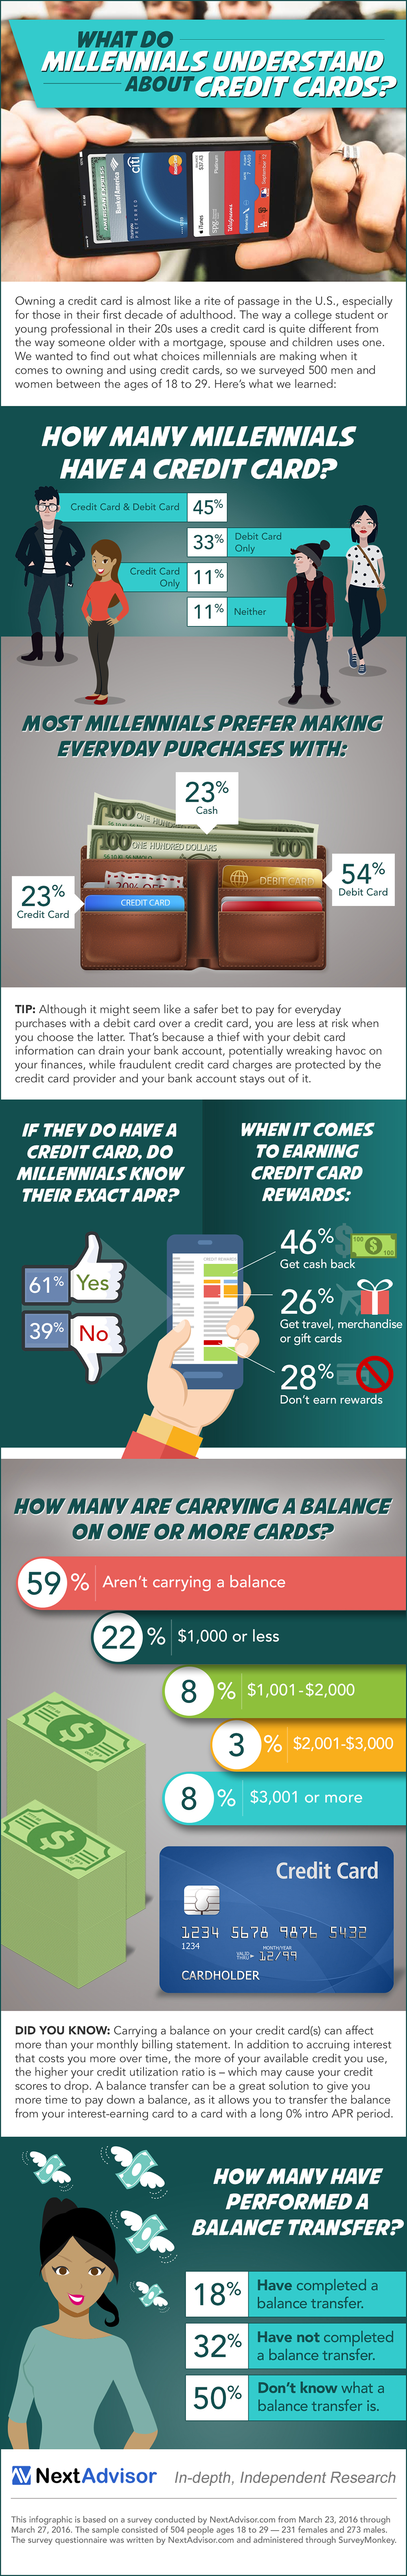 NextAdvisor.com has released new research showing the habits of twenty-somethings when it comes to owning and using credit cards.